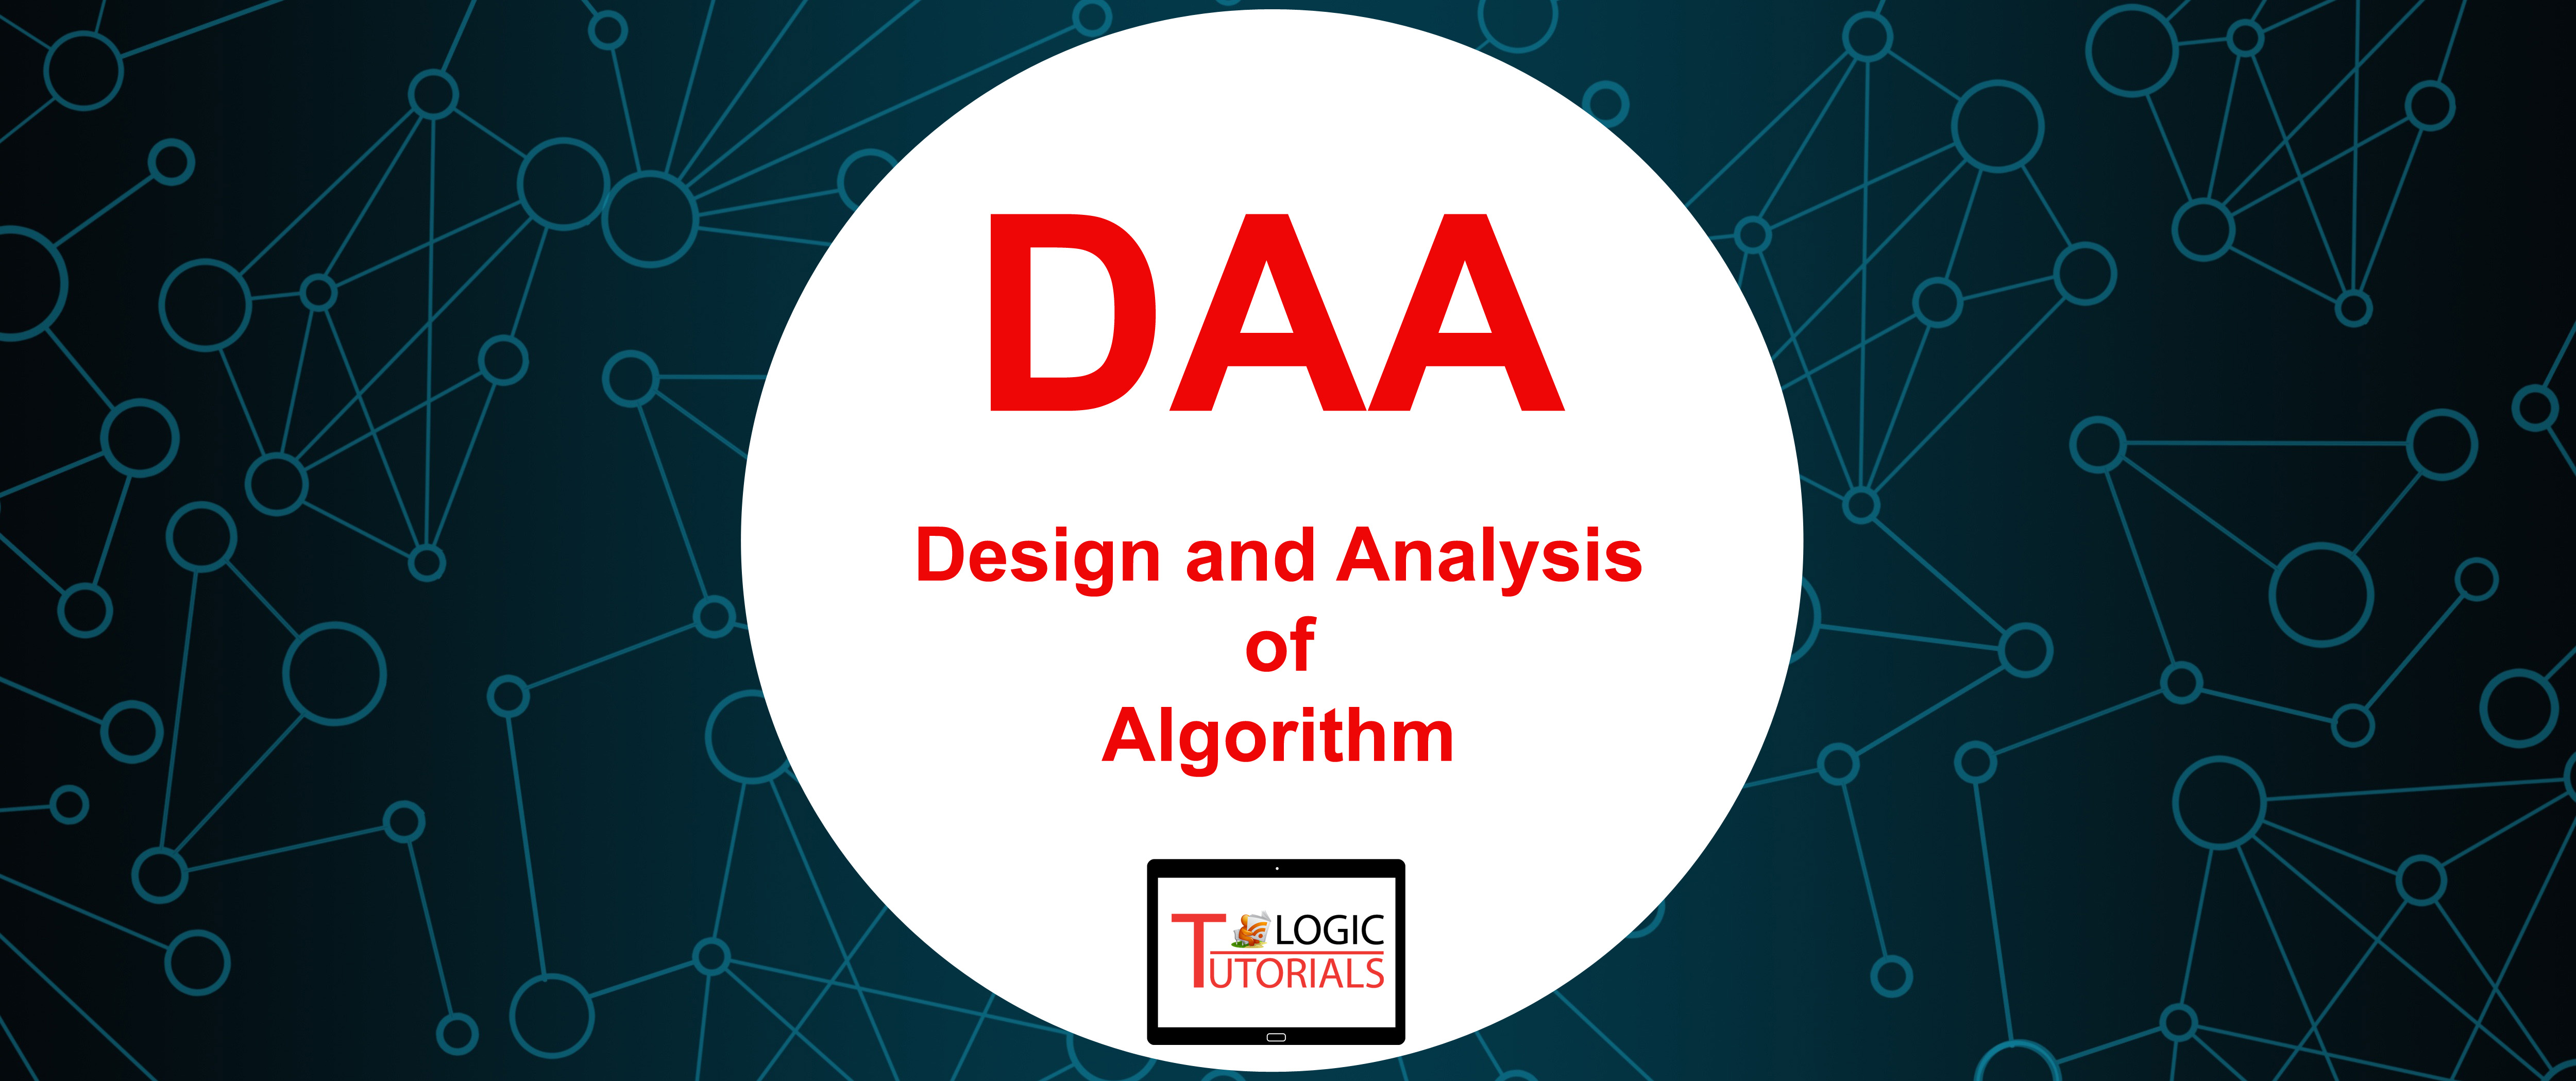 Design And Analysis Of Algorithms_2_2